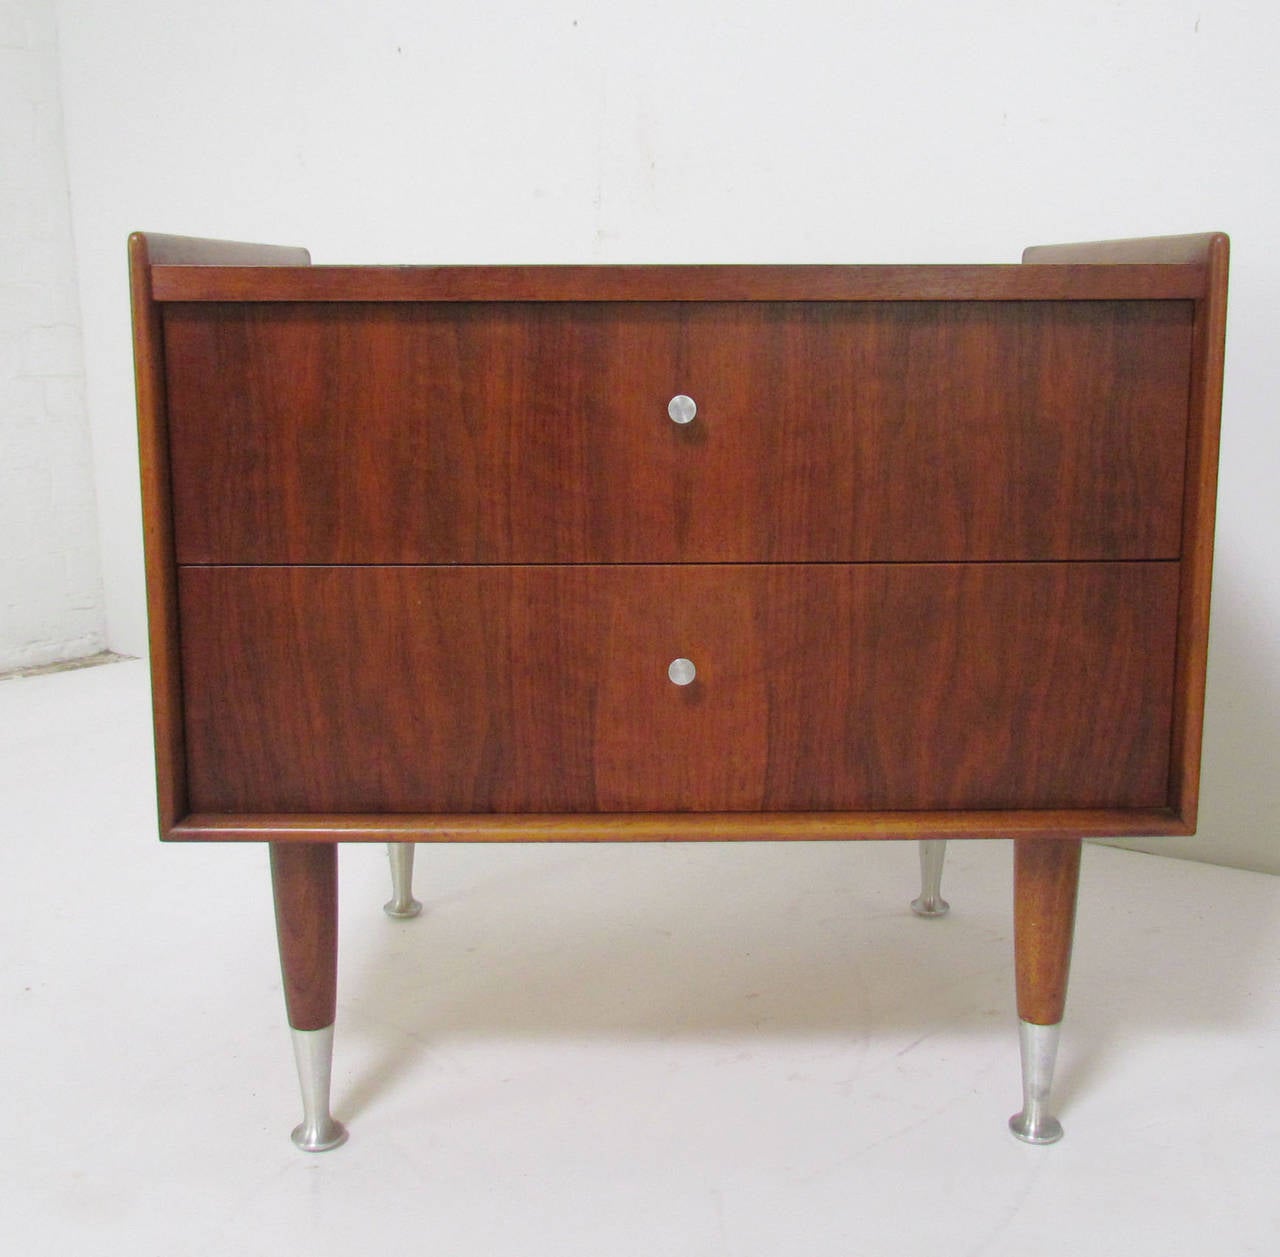 Mid-Century Modern nightstands in walnut with aluminum pulls and spun aluminum feet by Edmond Spence, Sweden, circa 1950s, in the early Danish modern style.